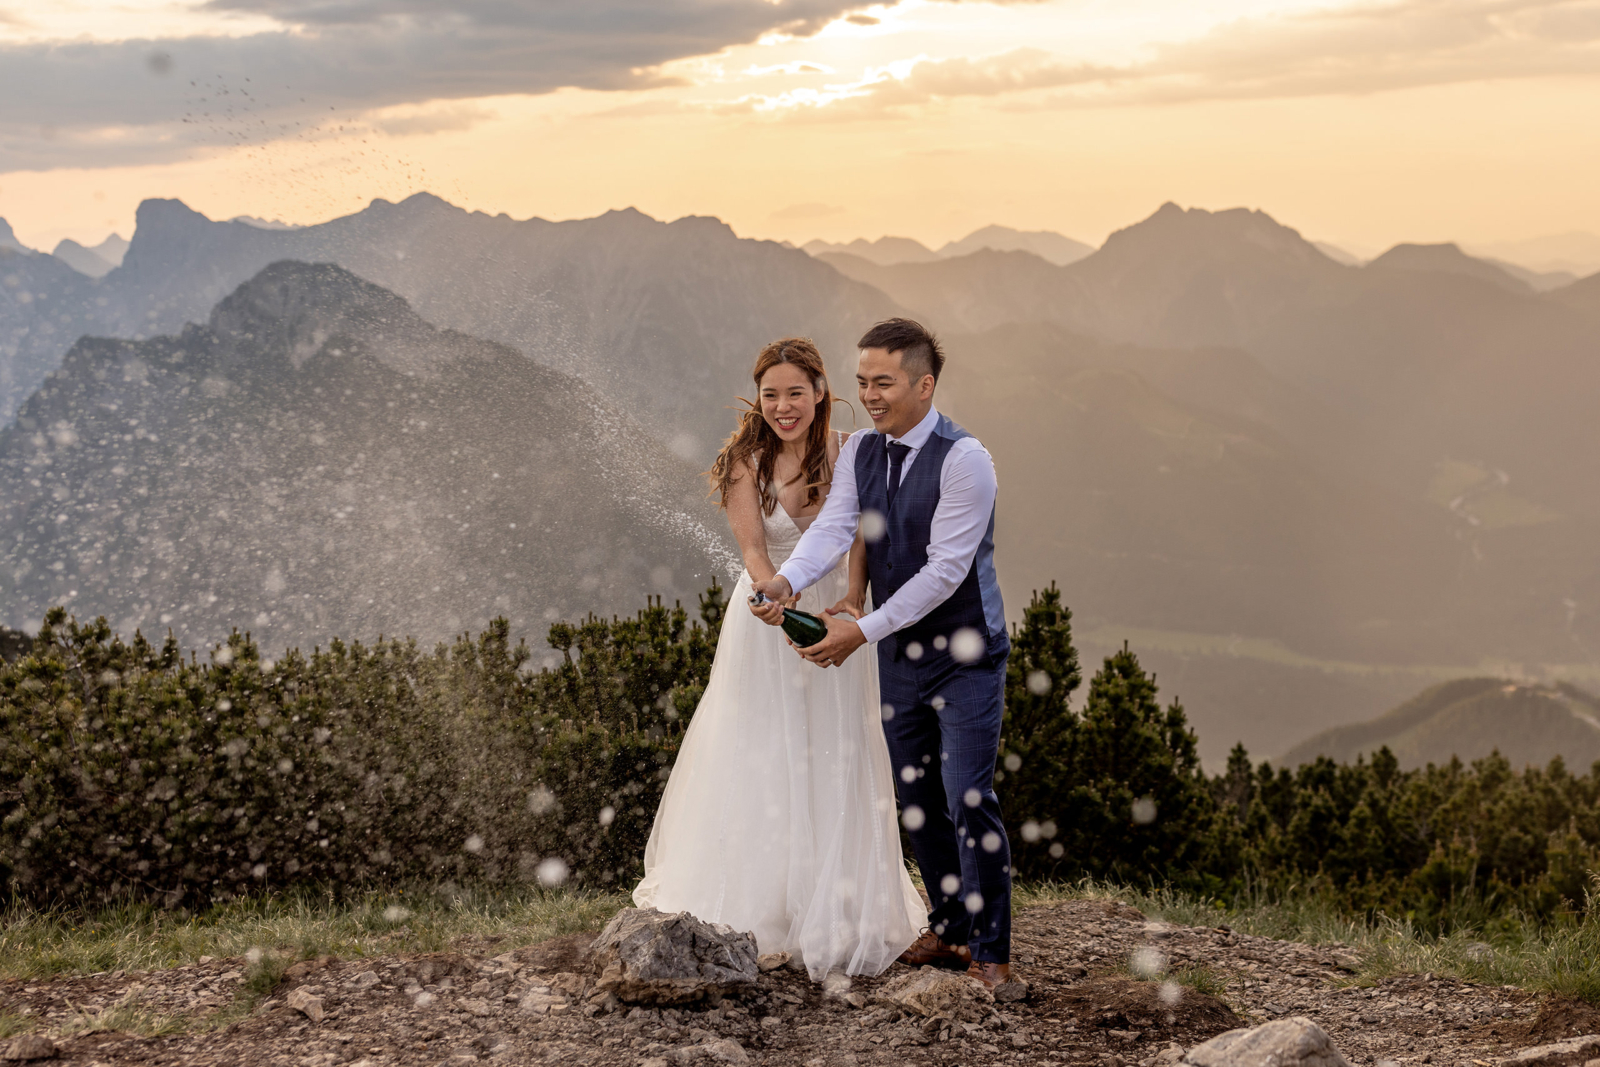 champagne pop to celebrate the mountain elopement in Austria